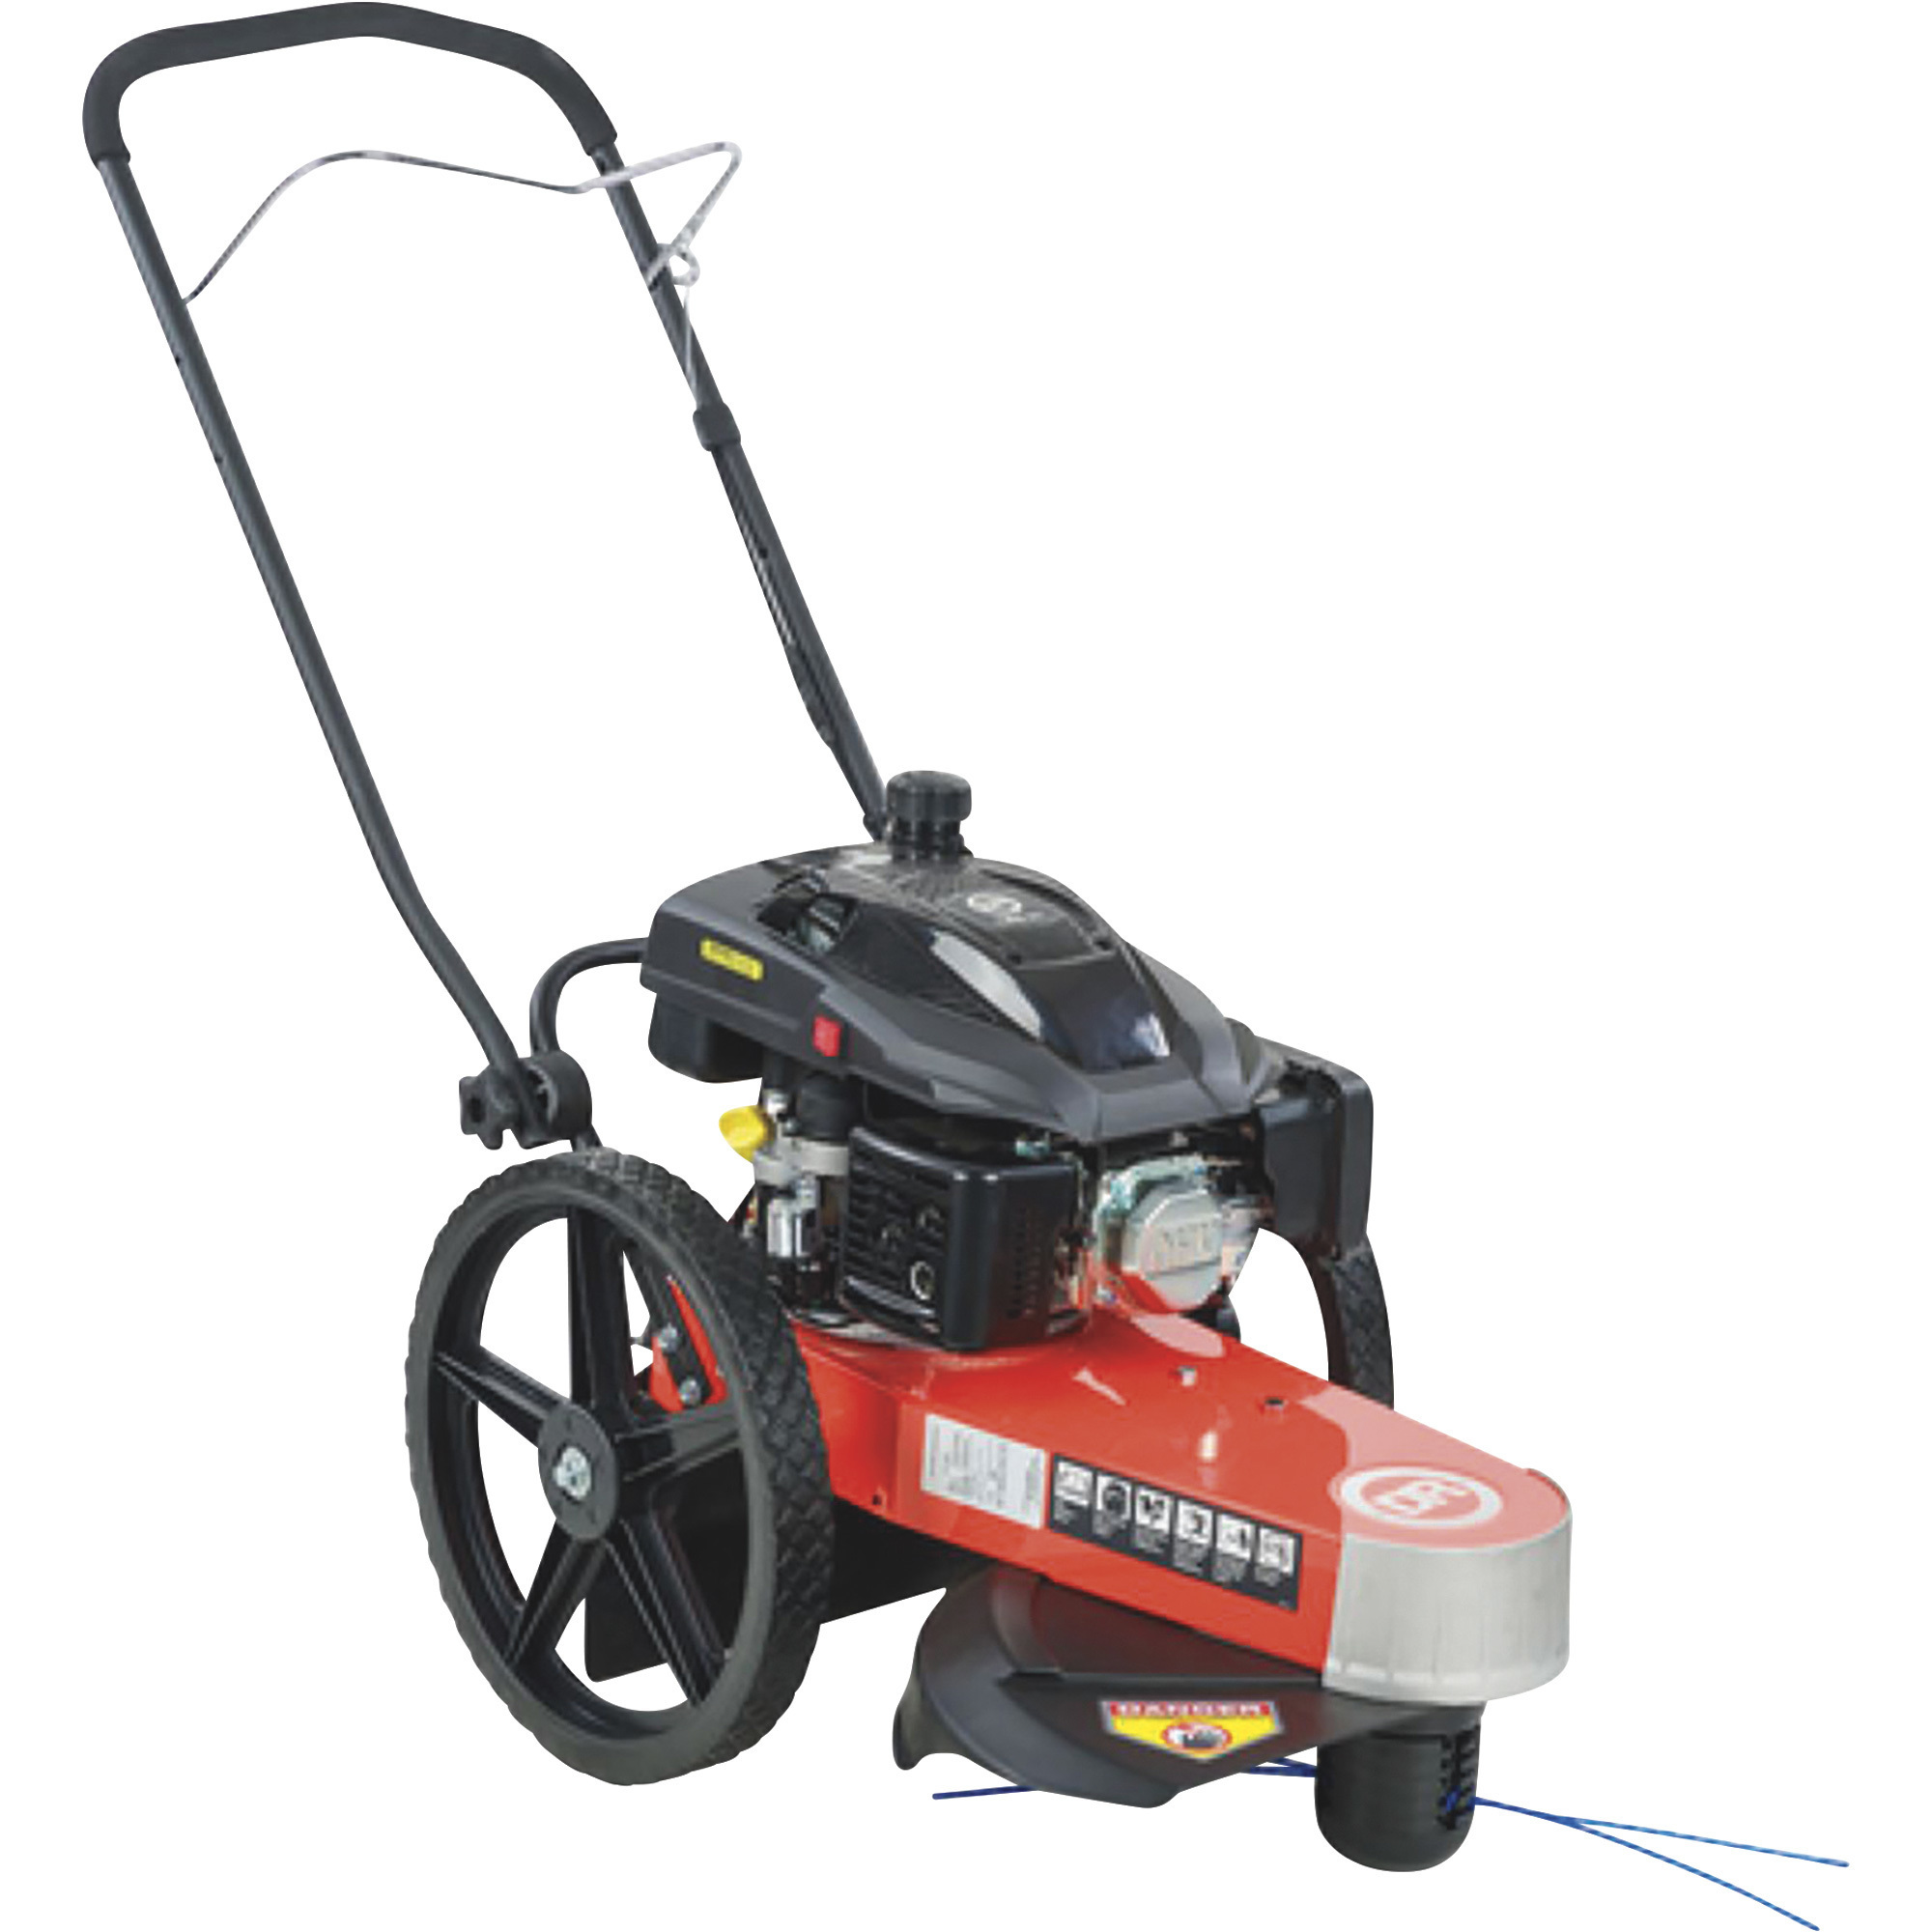 DR Power PRO XLSP Self-Propelled Trimmer Mower, 190cc OHV Engine, Electric Start, 22Inch Cutting Path, Model TR47010DEN